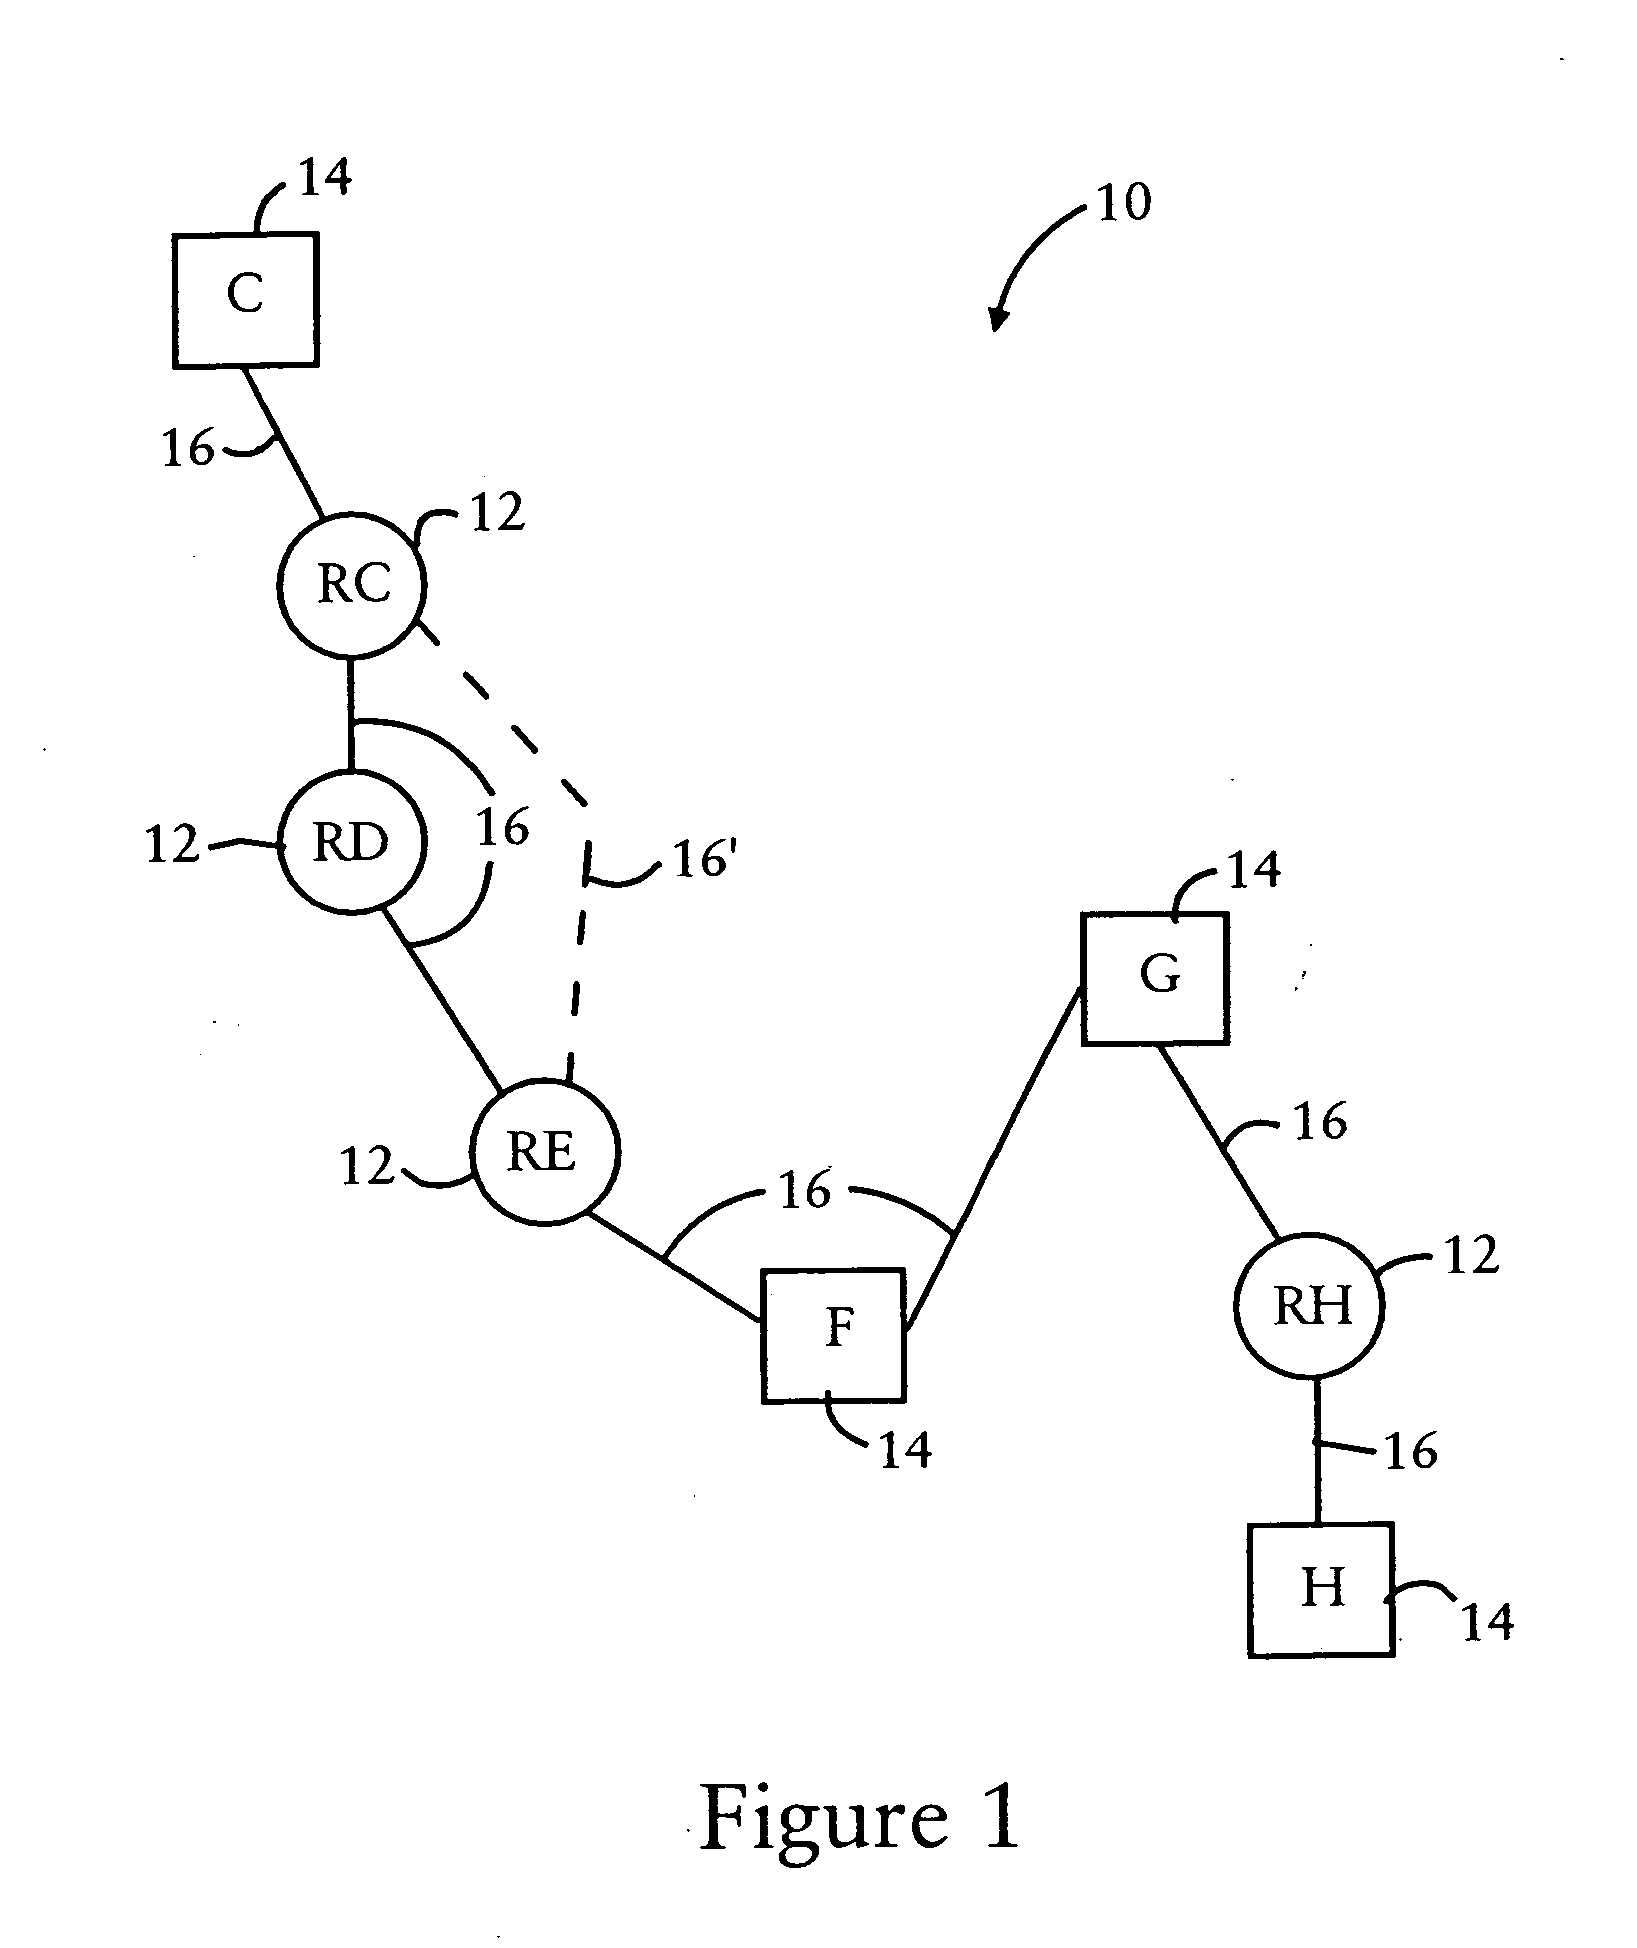 Compression of a routing header in a packet by a mobile router in an ad hoc network